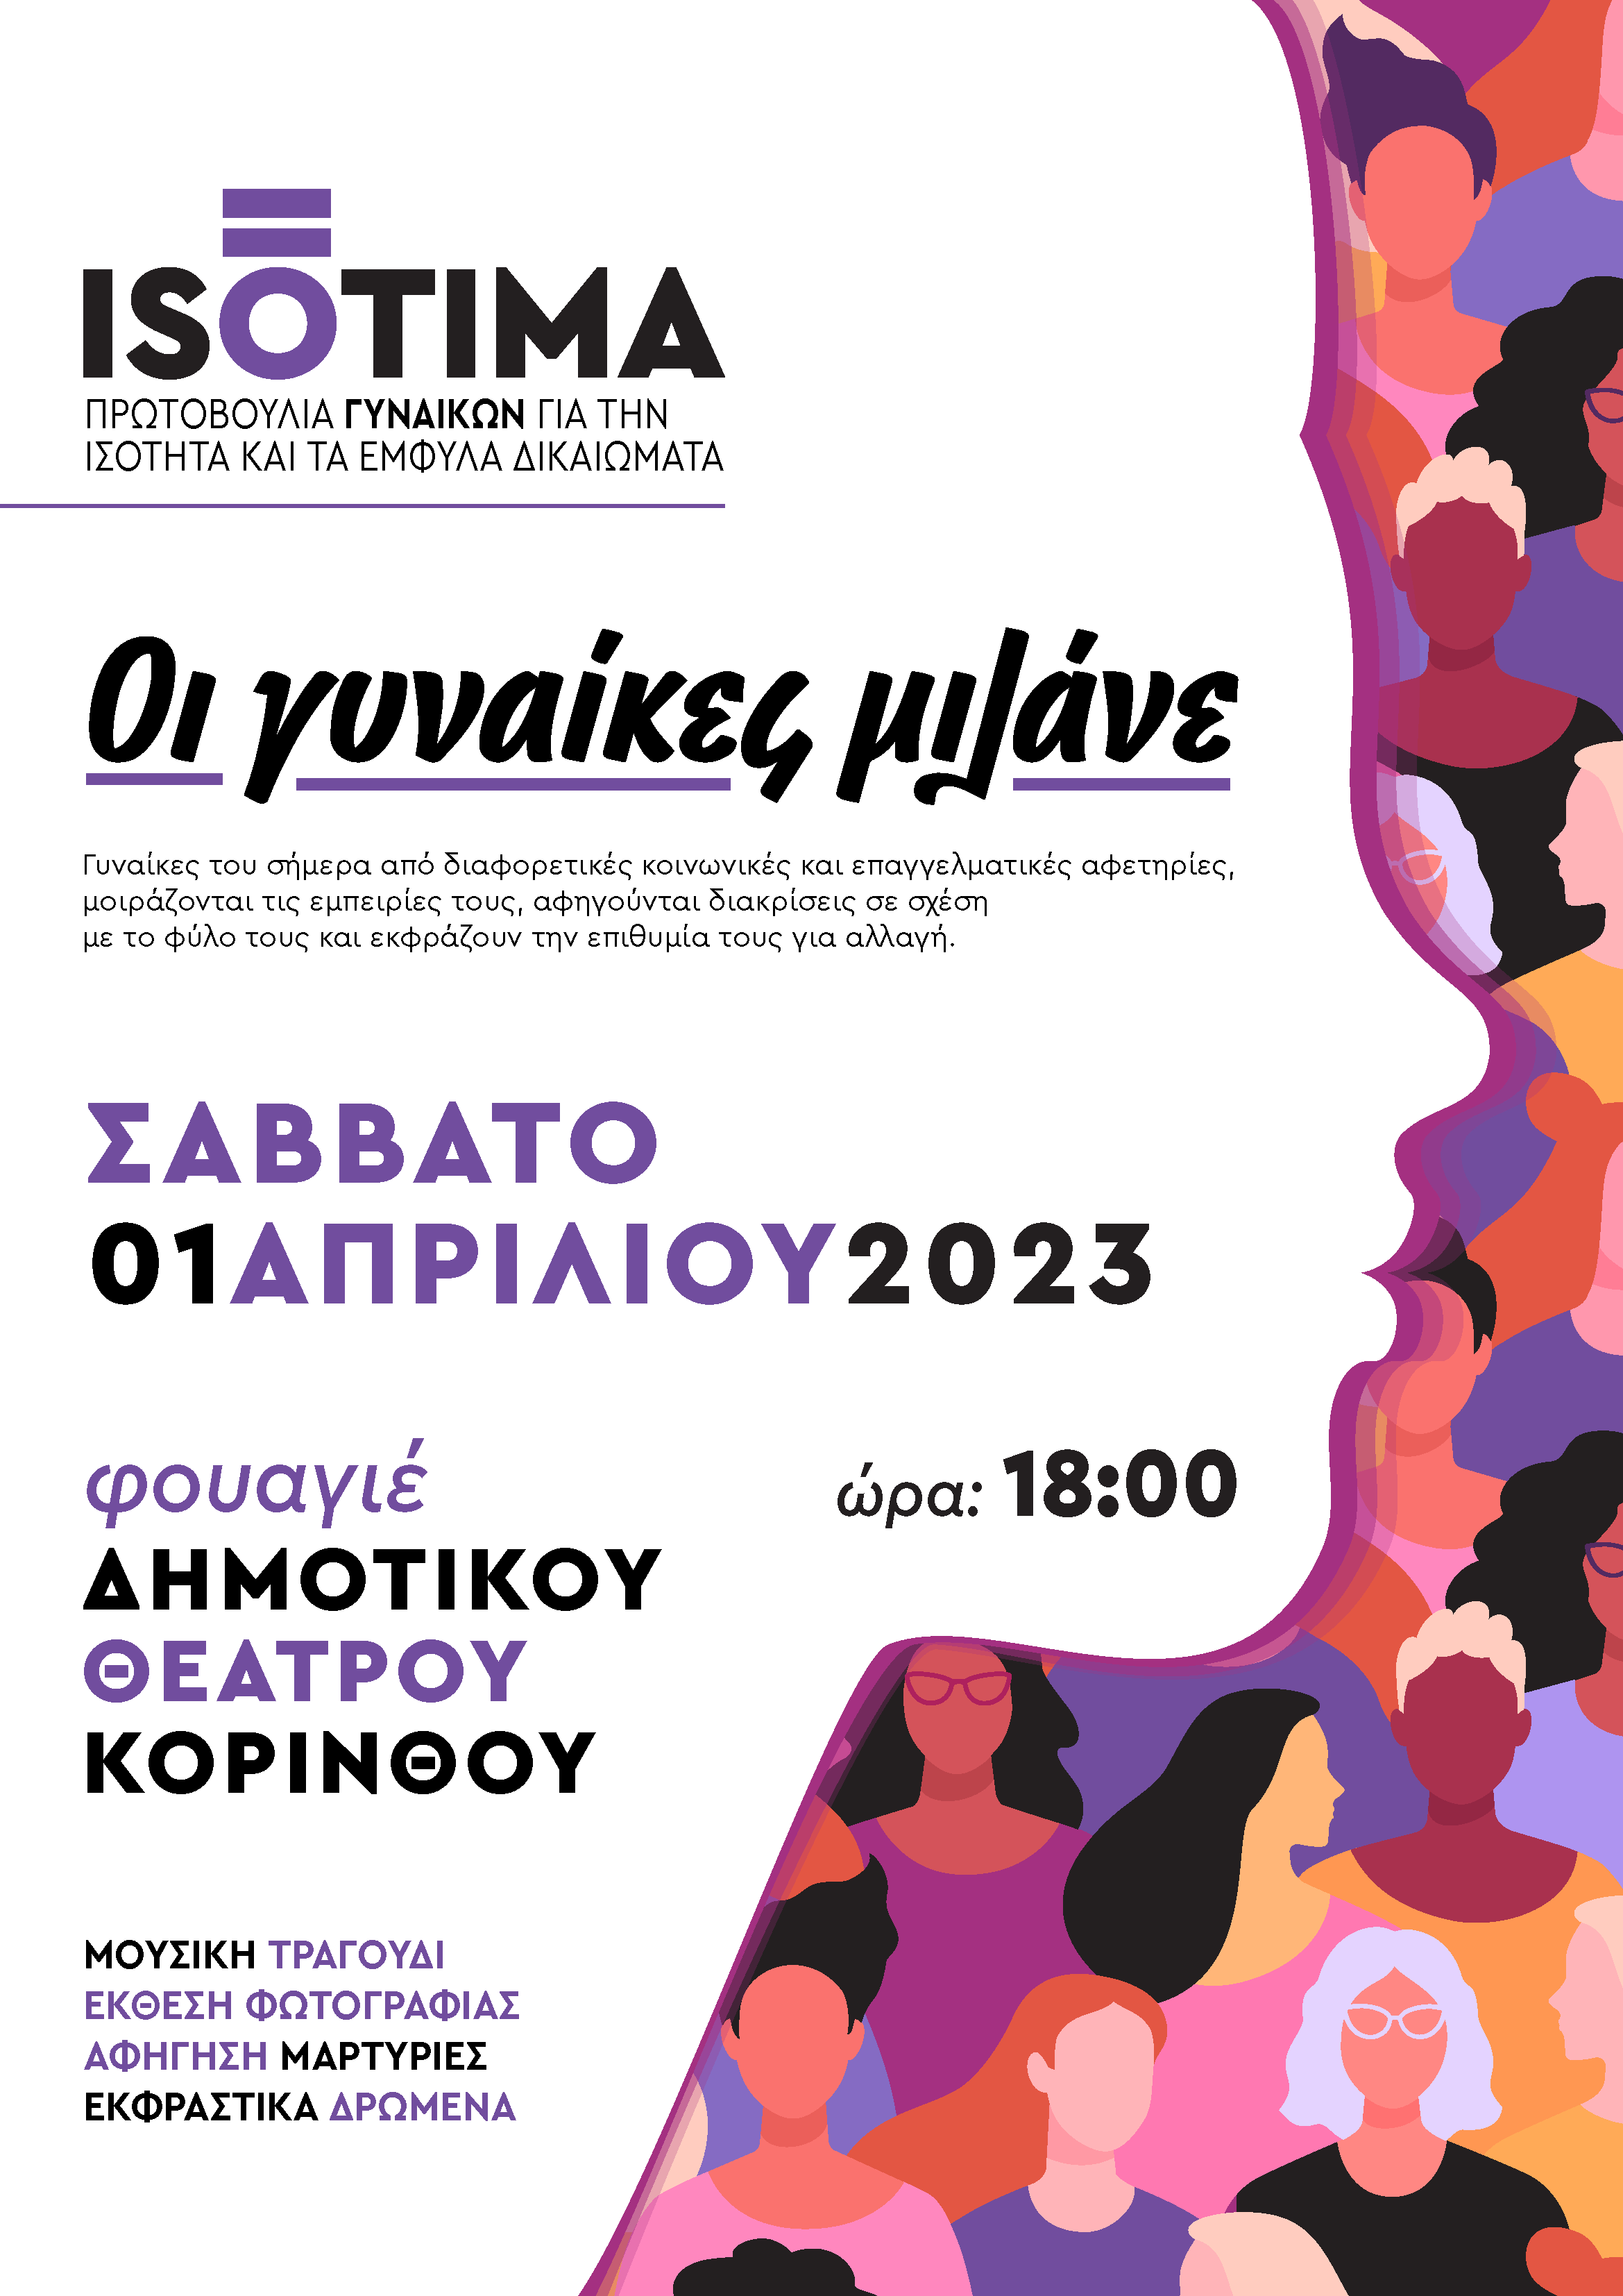 isotima_poster